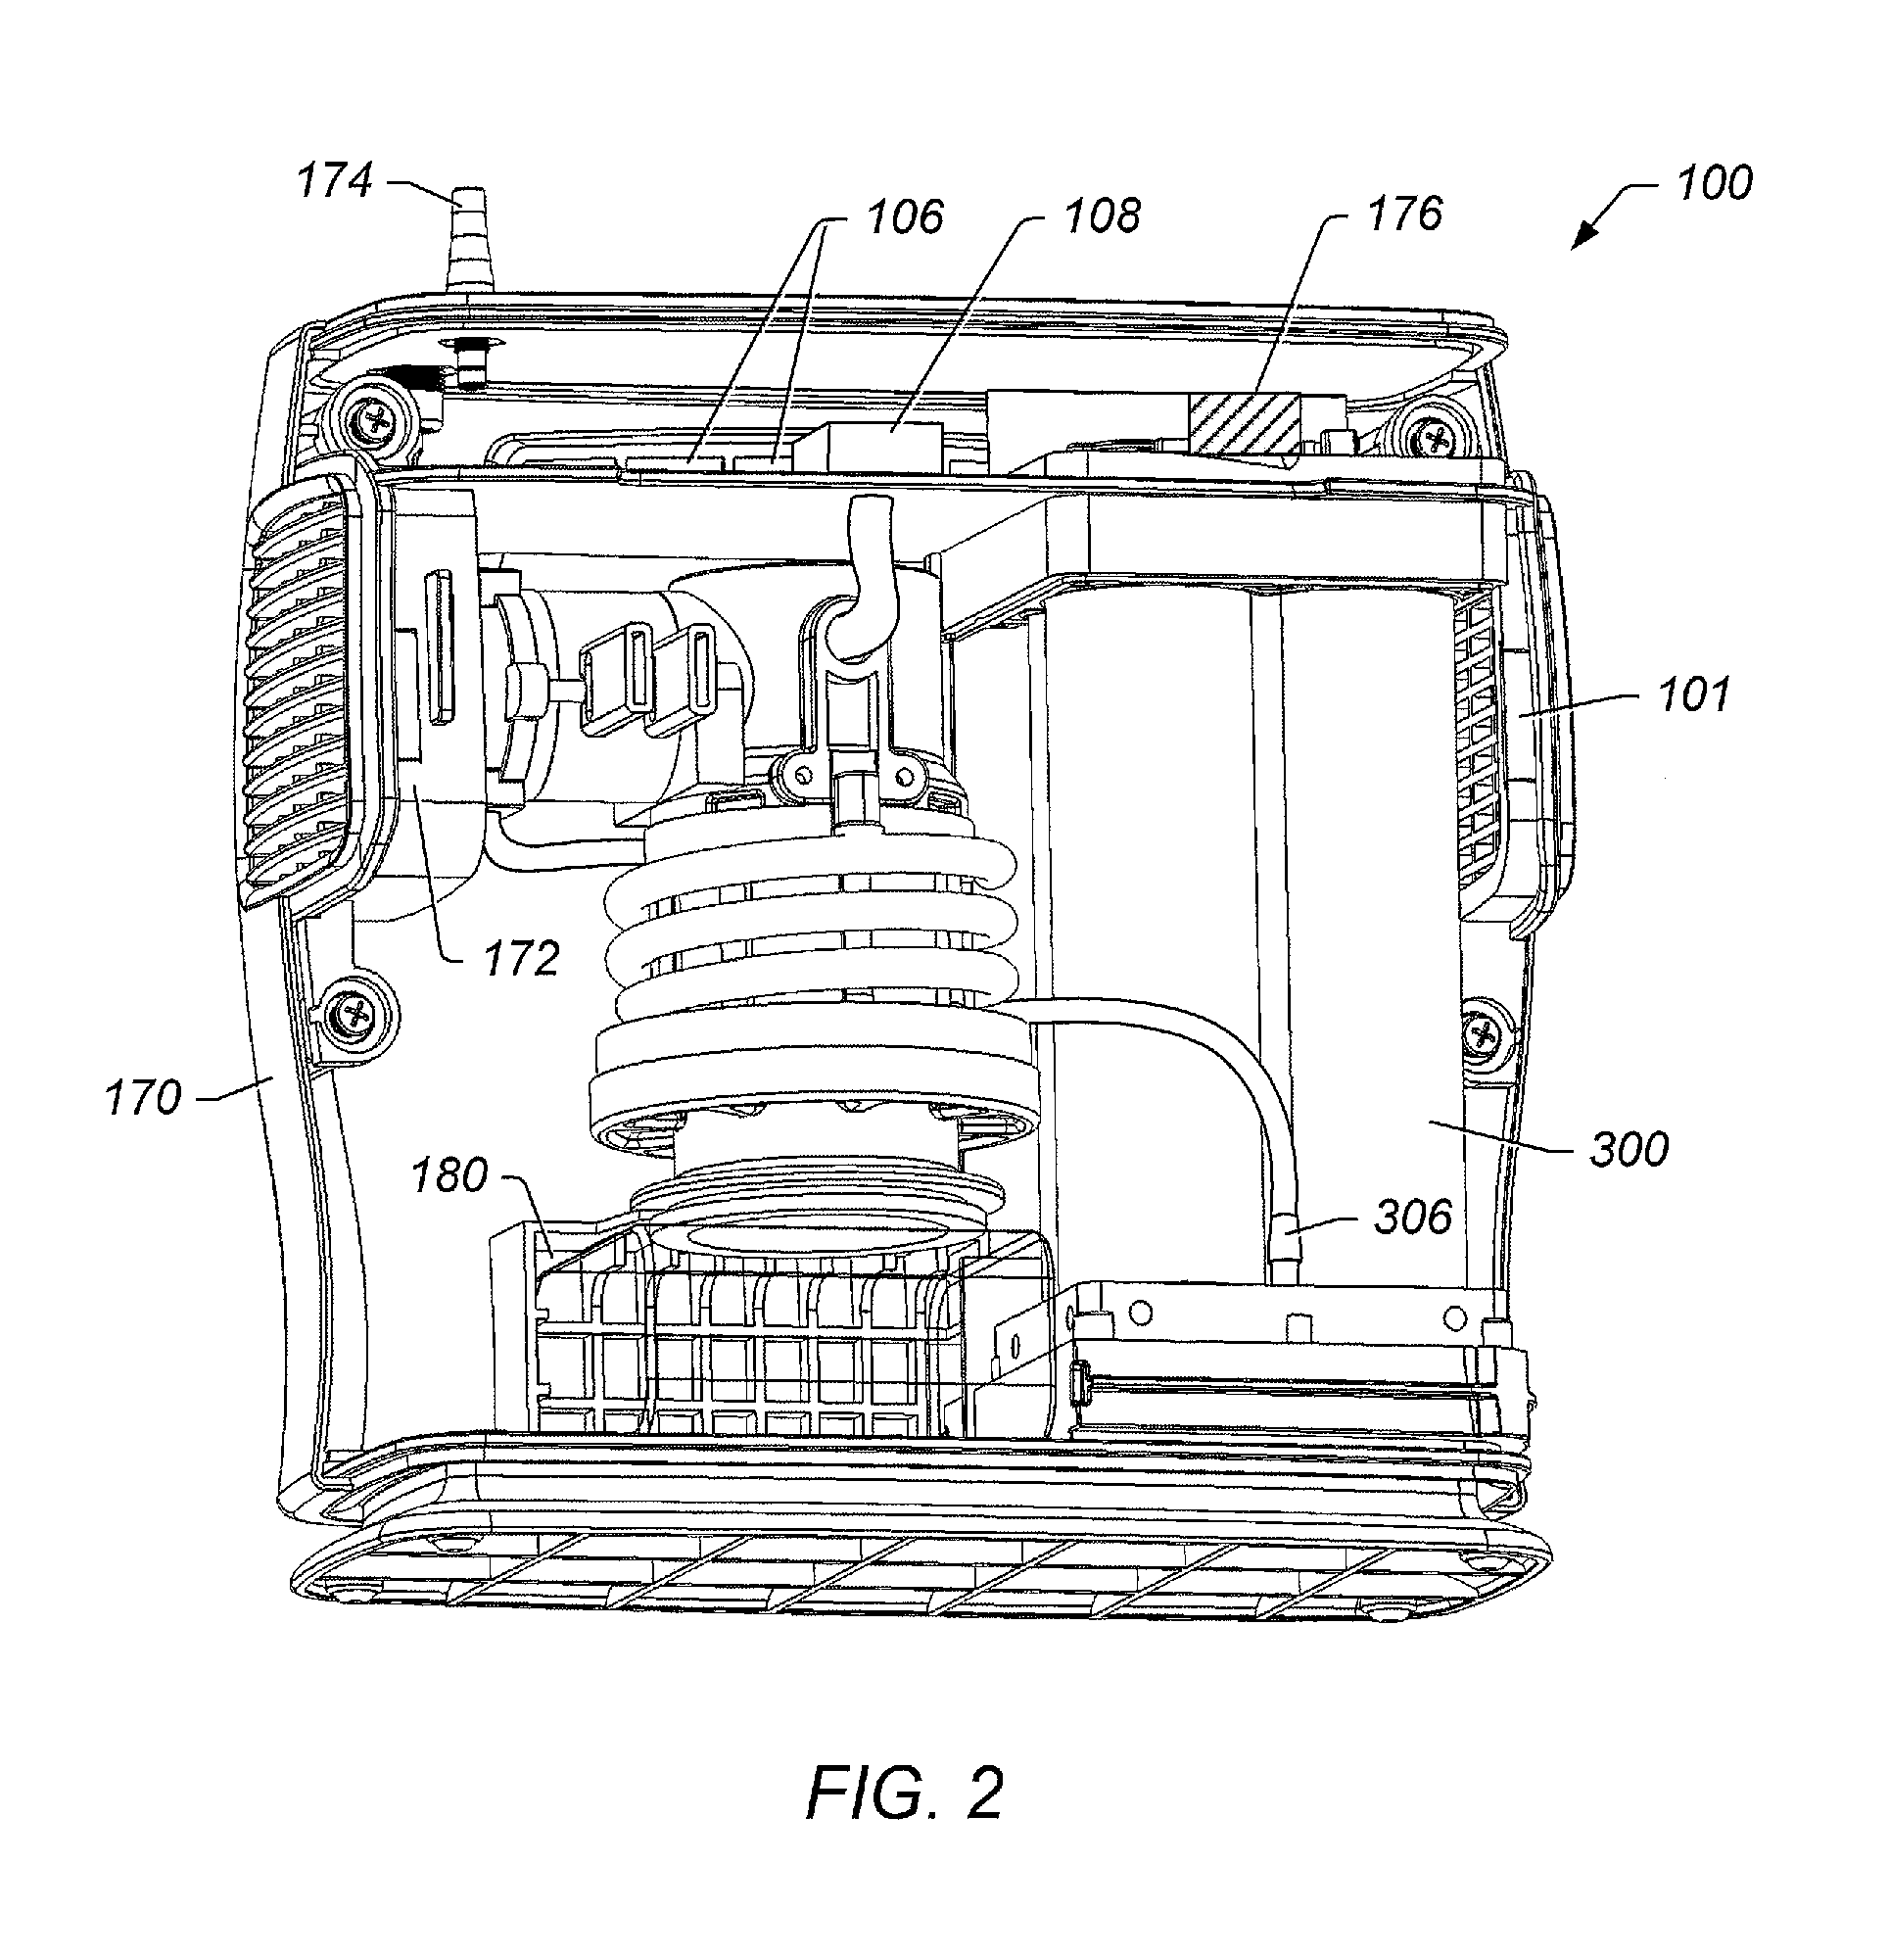 Power management systems and methods for use in an oxygen concentrator